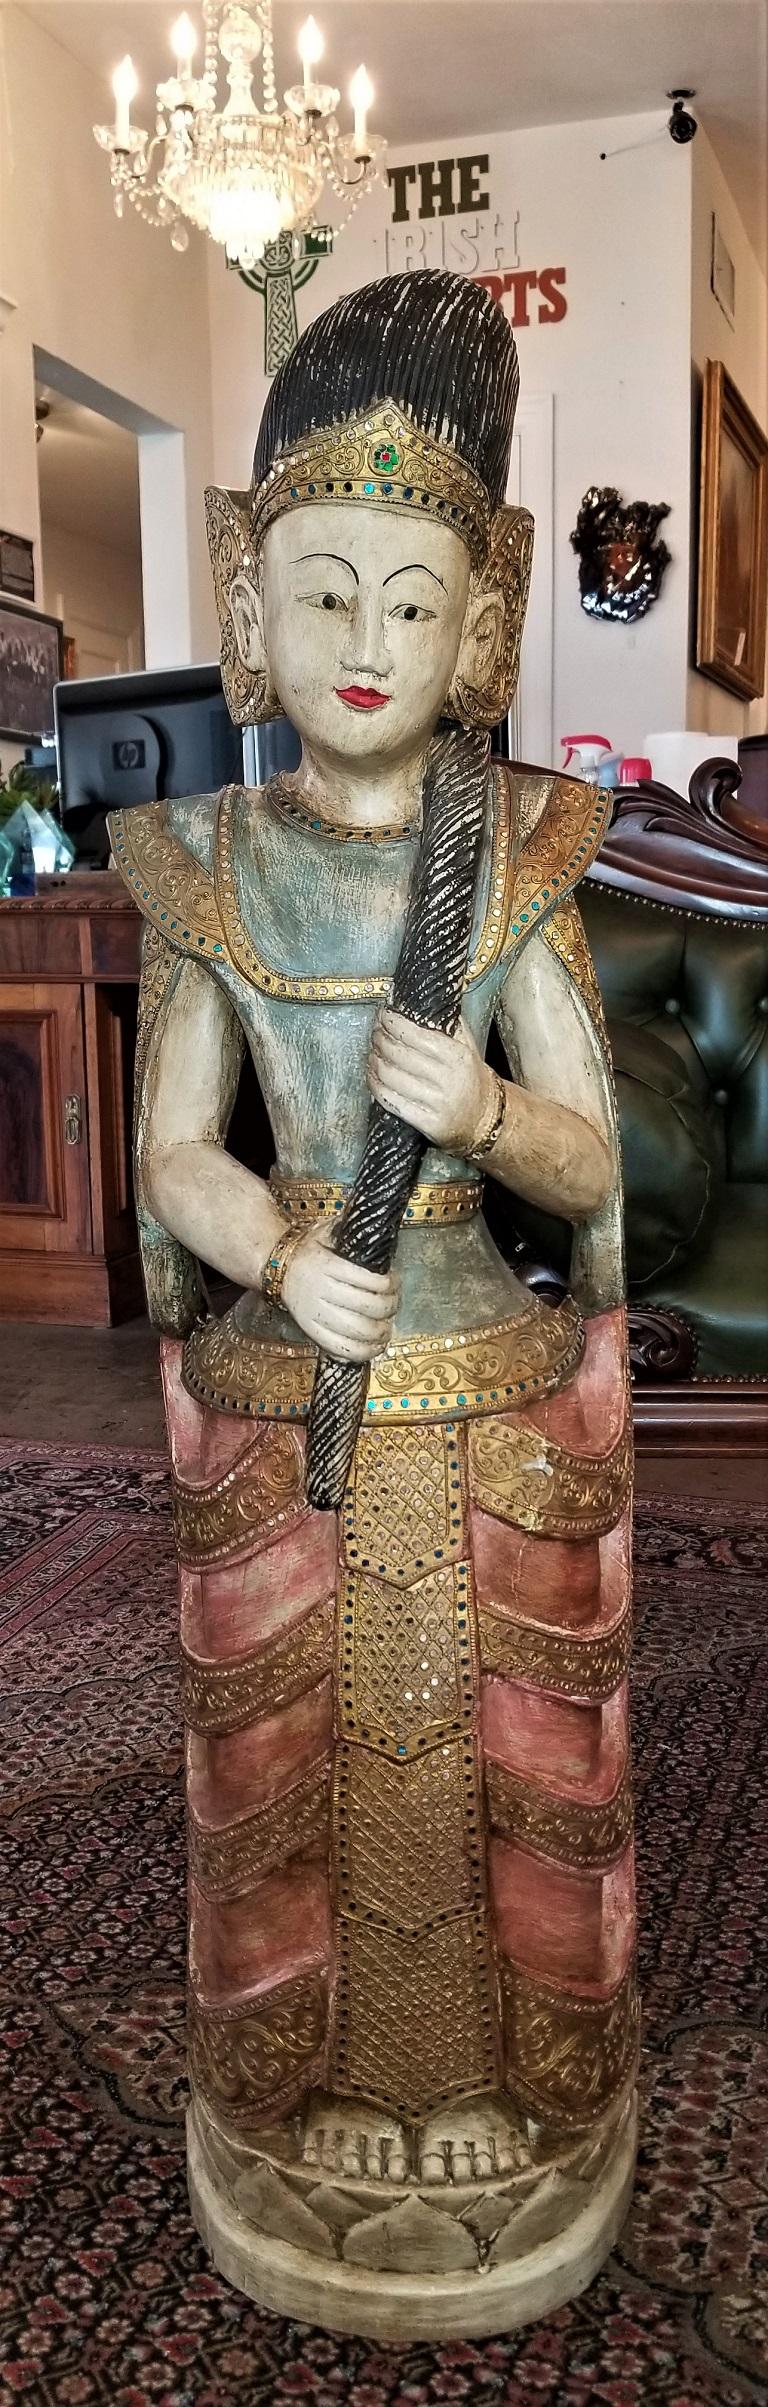 Presenting a gorgeous early 20th century Thai goddess polychrome statue.
Made in Thailand in the early 20th century, circa 1920.
Hand carved wooden statue which has been hand painted (polychromed) all-over. The headdress is gilded, as are parts of